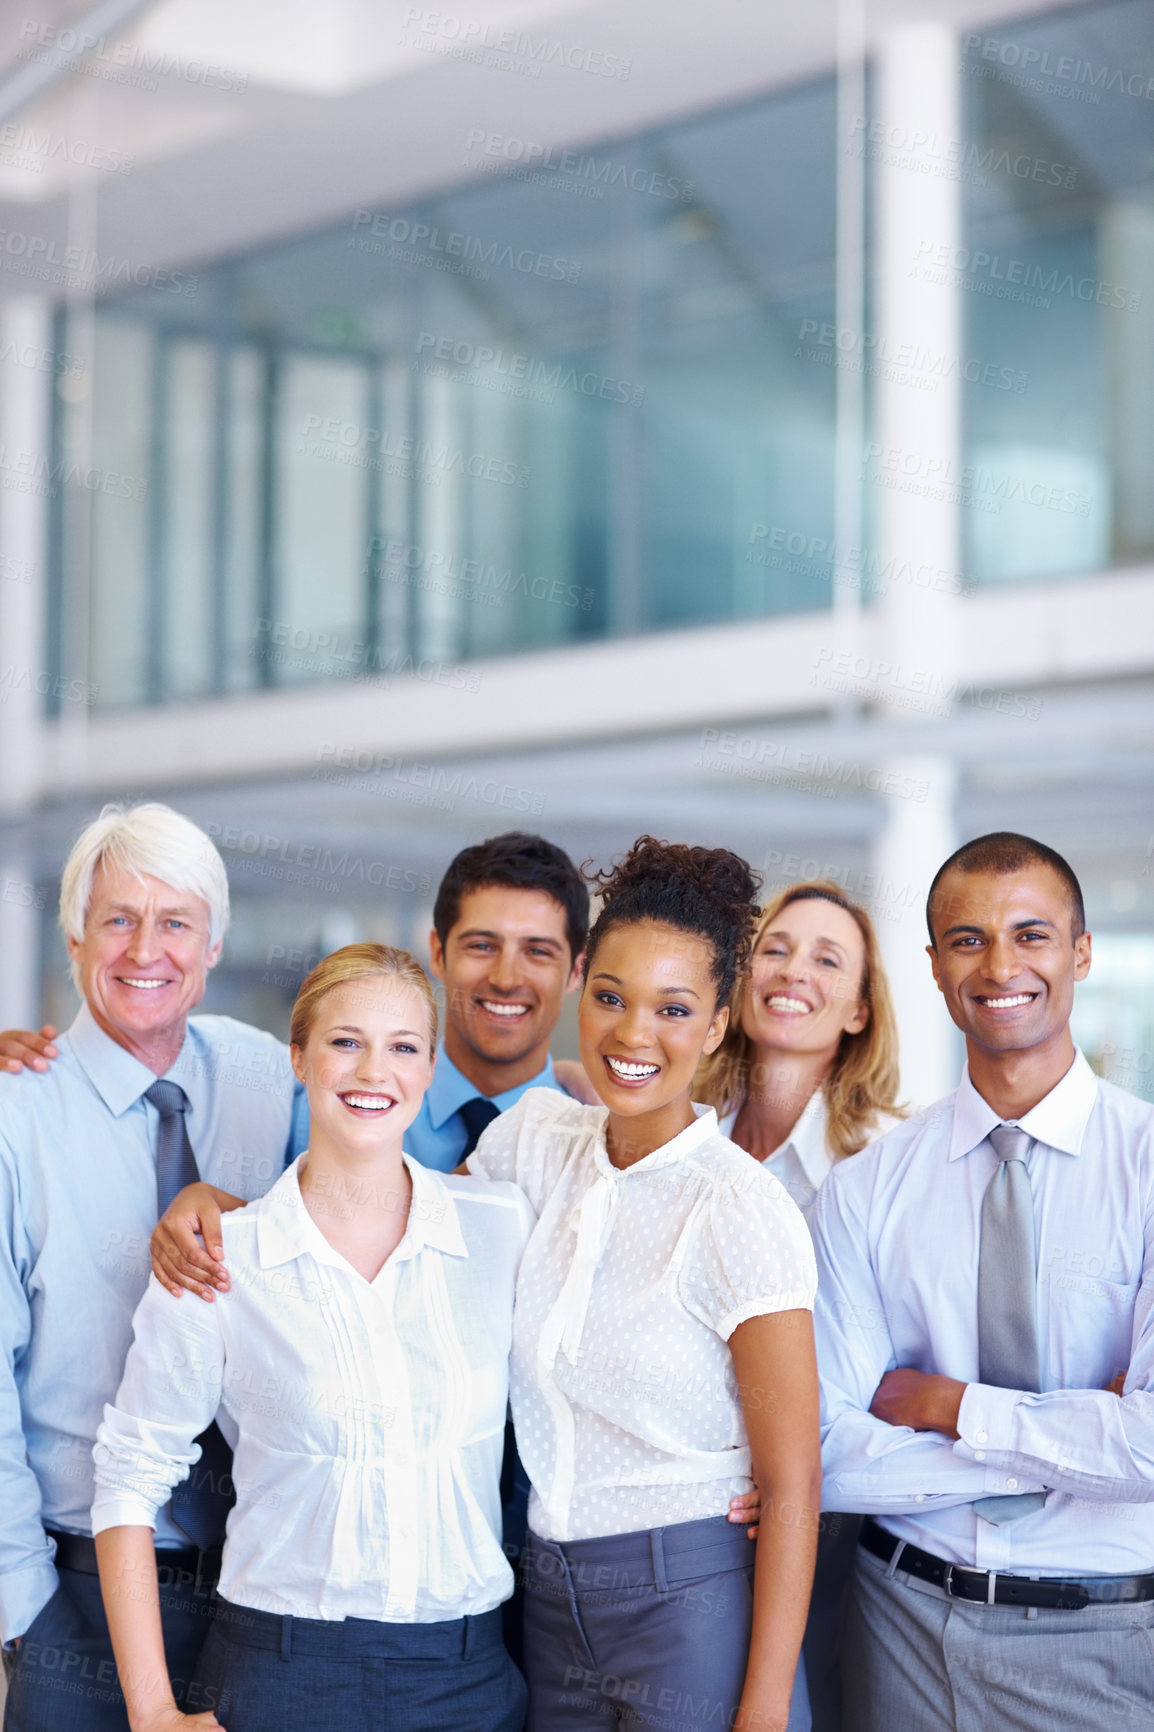 Buy stock photo Portrait of smiling business team standing together at office